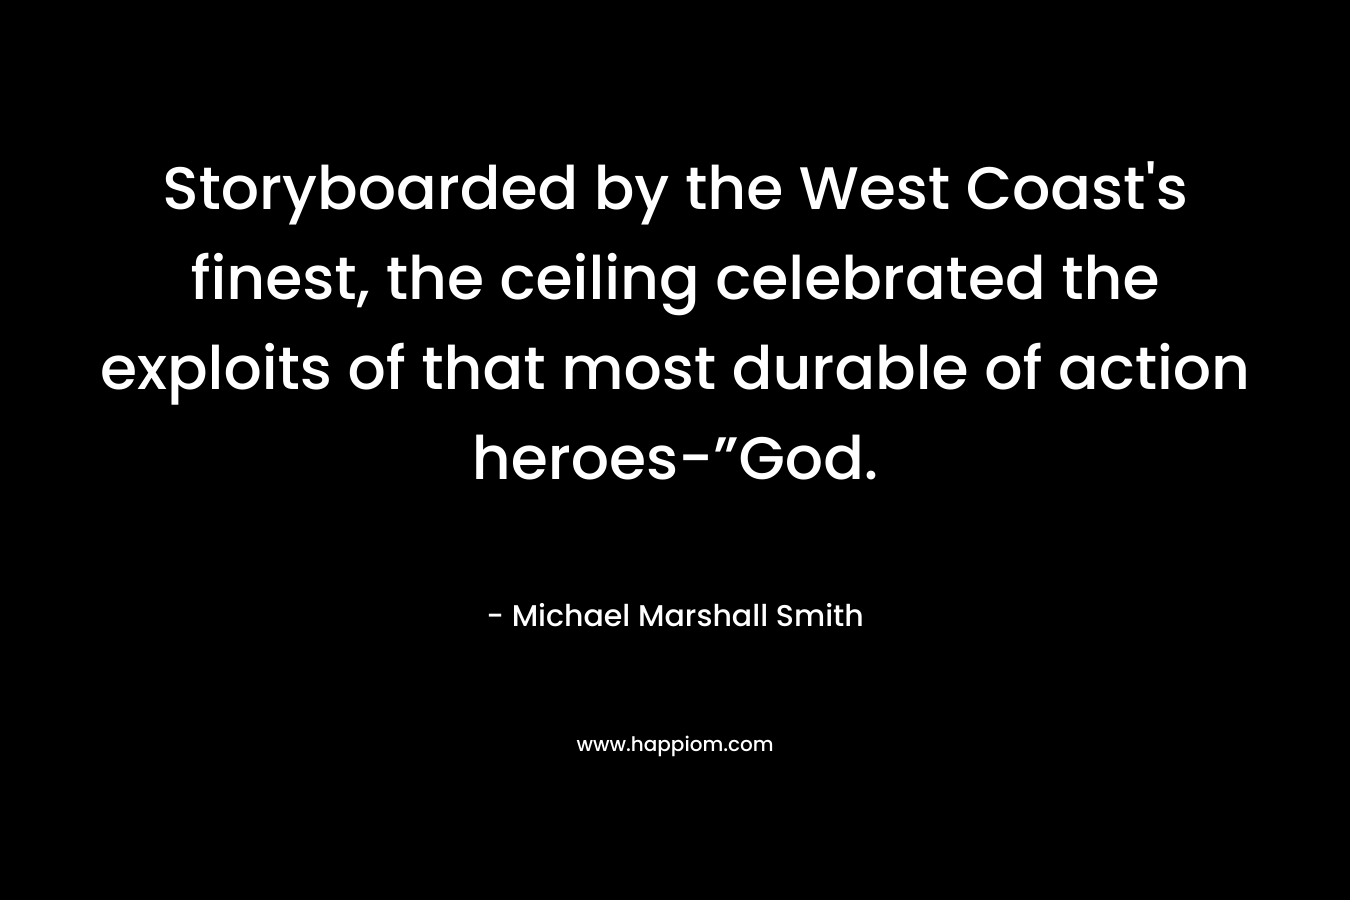 Storyboarded by the West Coast’s finest, the ceiling celebrated the exploits of that most durable of action heroes-”God. – Michael Marshall Smith